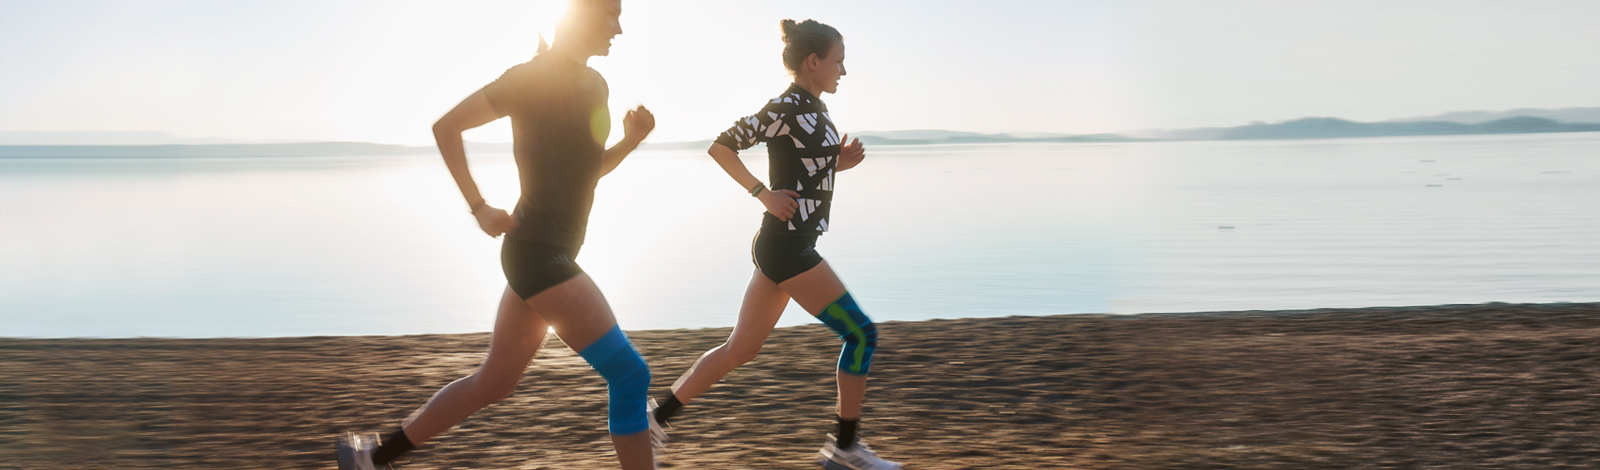 Two runners with knee bands run at a beach next to a lake at dusk